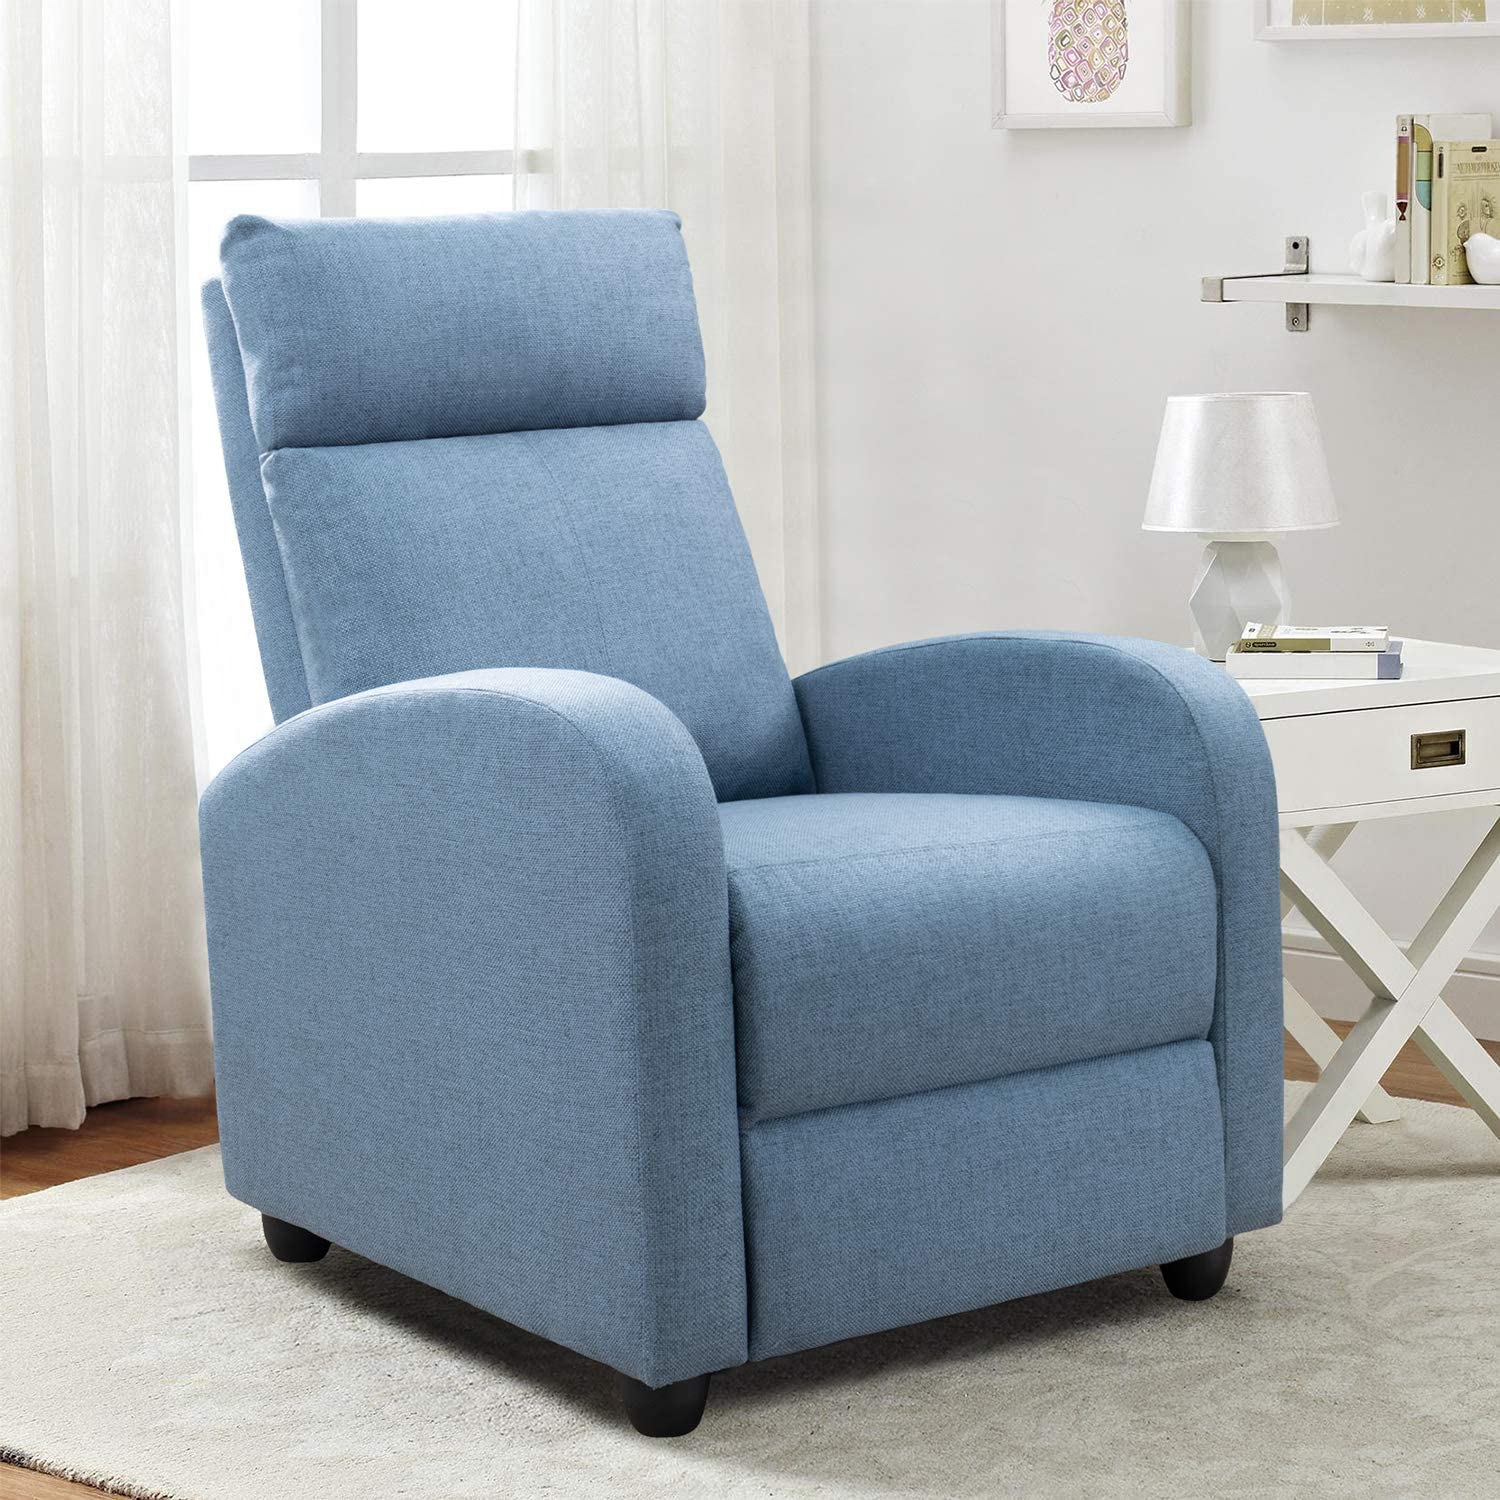 Furniwell Fabric Recliner Chair Adjustable Modern Home Theater Seating